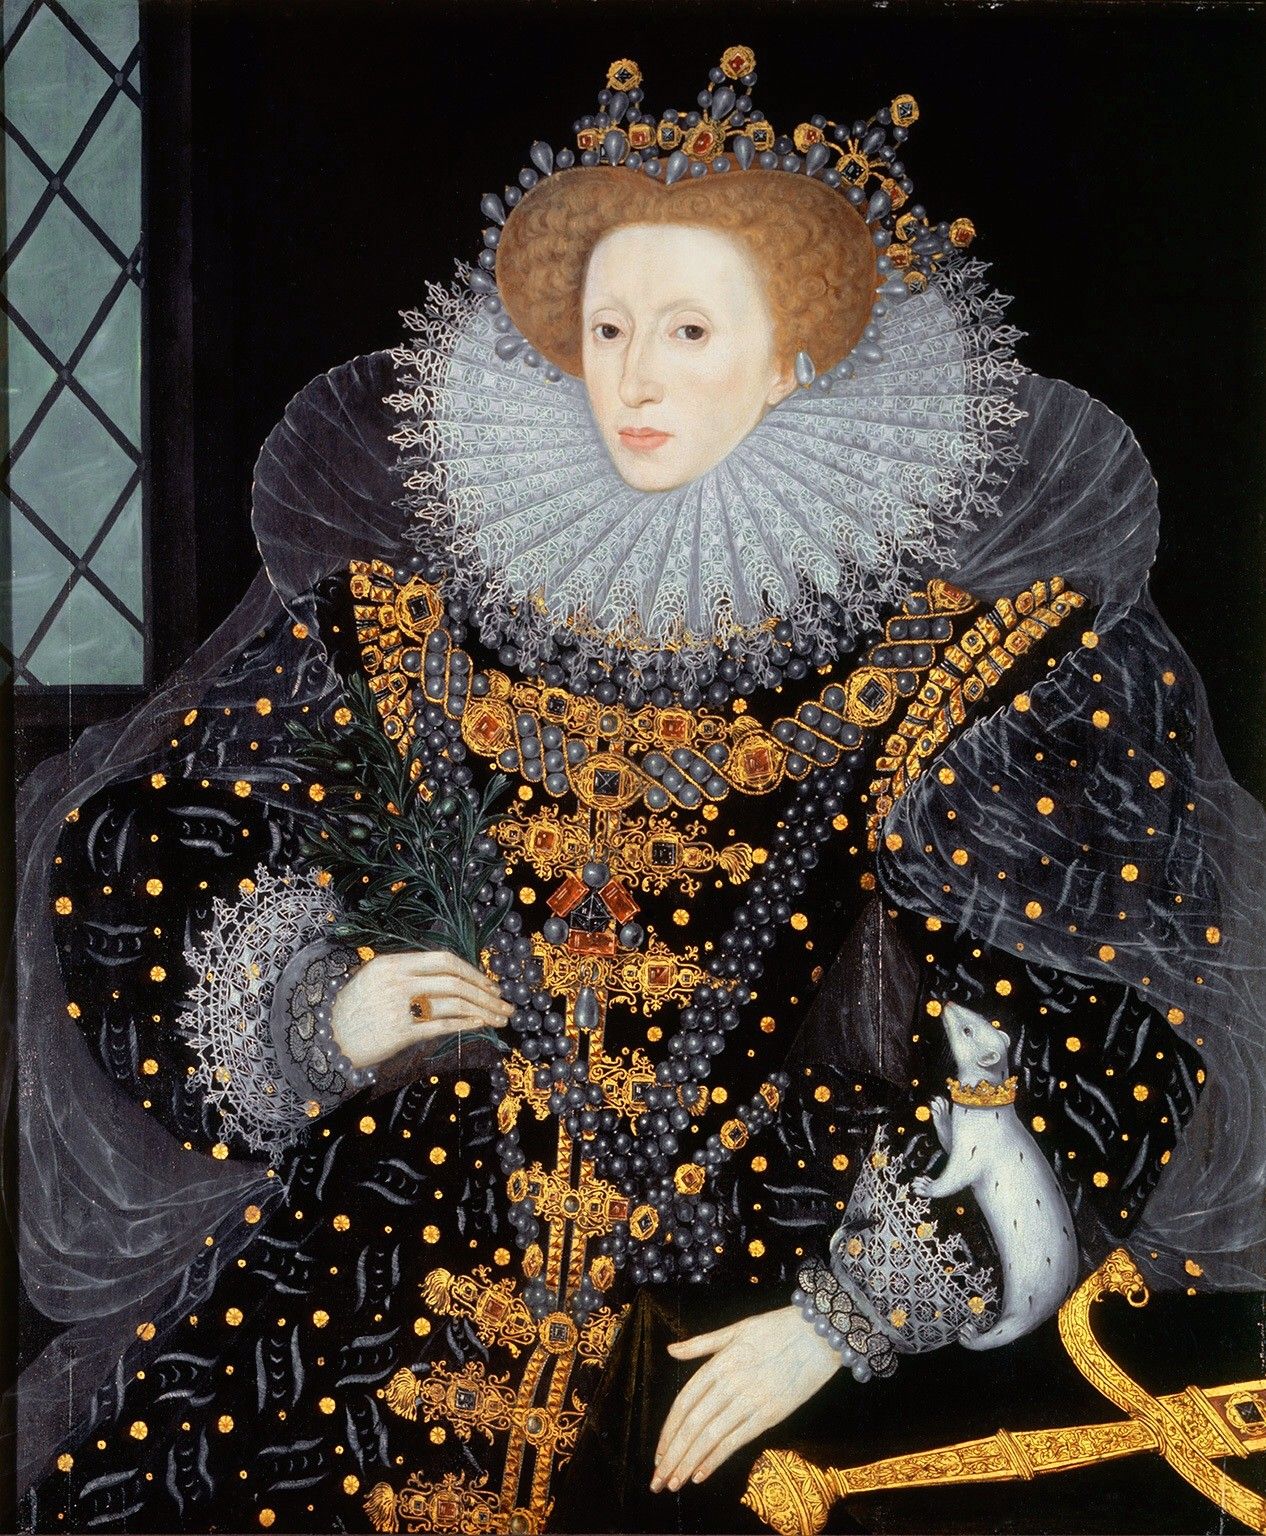 even the ermine is wearing pearls in this portrait of pearl-bedecked Queen Elizabeth I. The Ermine Portrait, attributed to William Segar or George Gower, 1585.